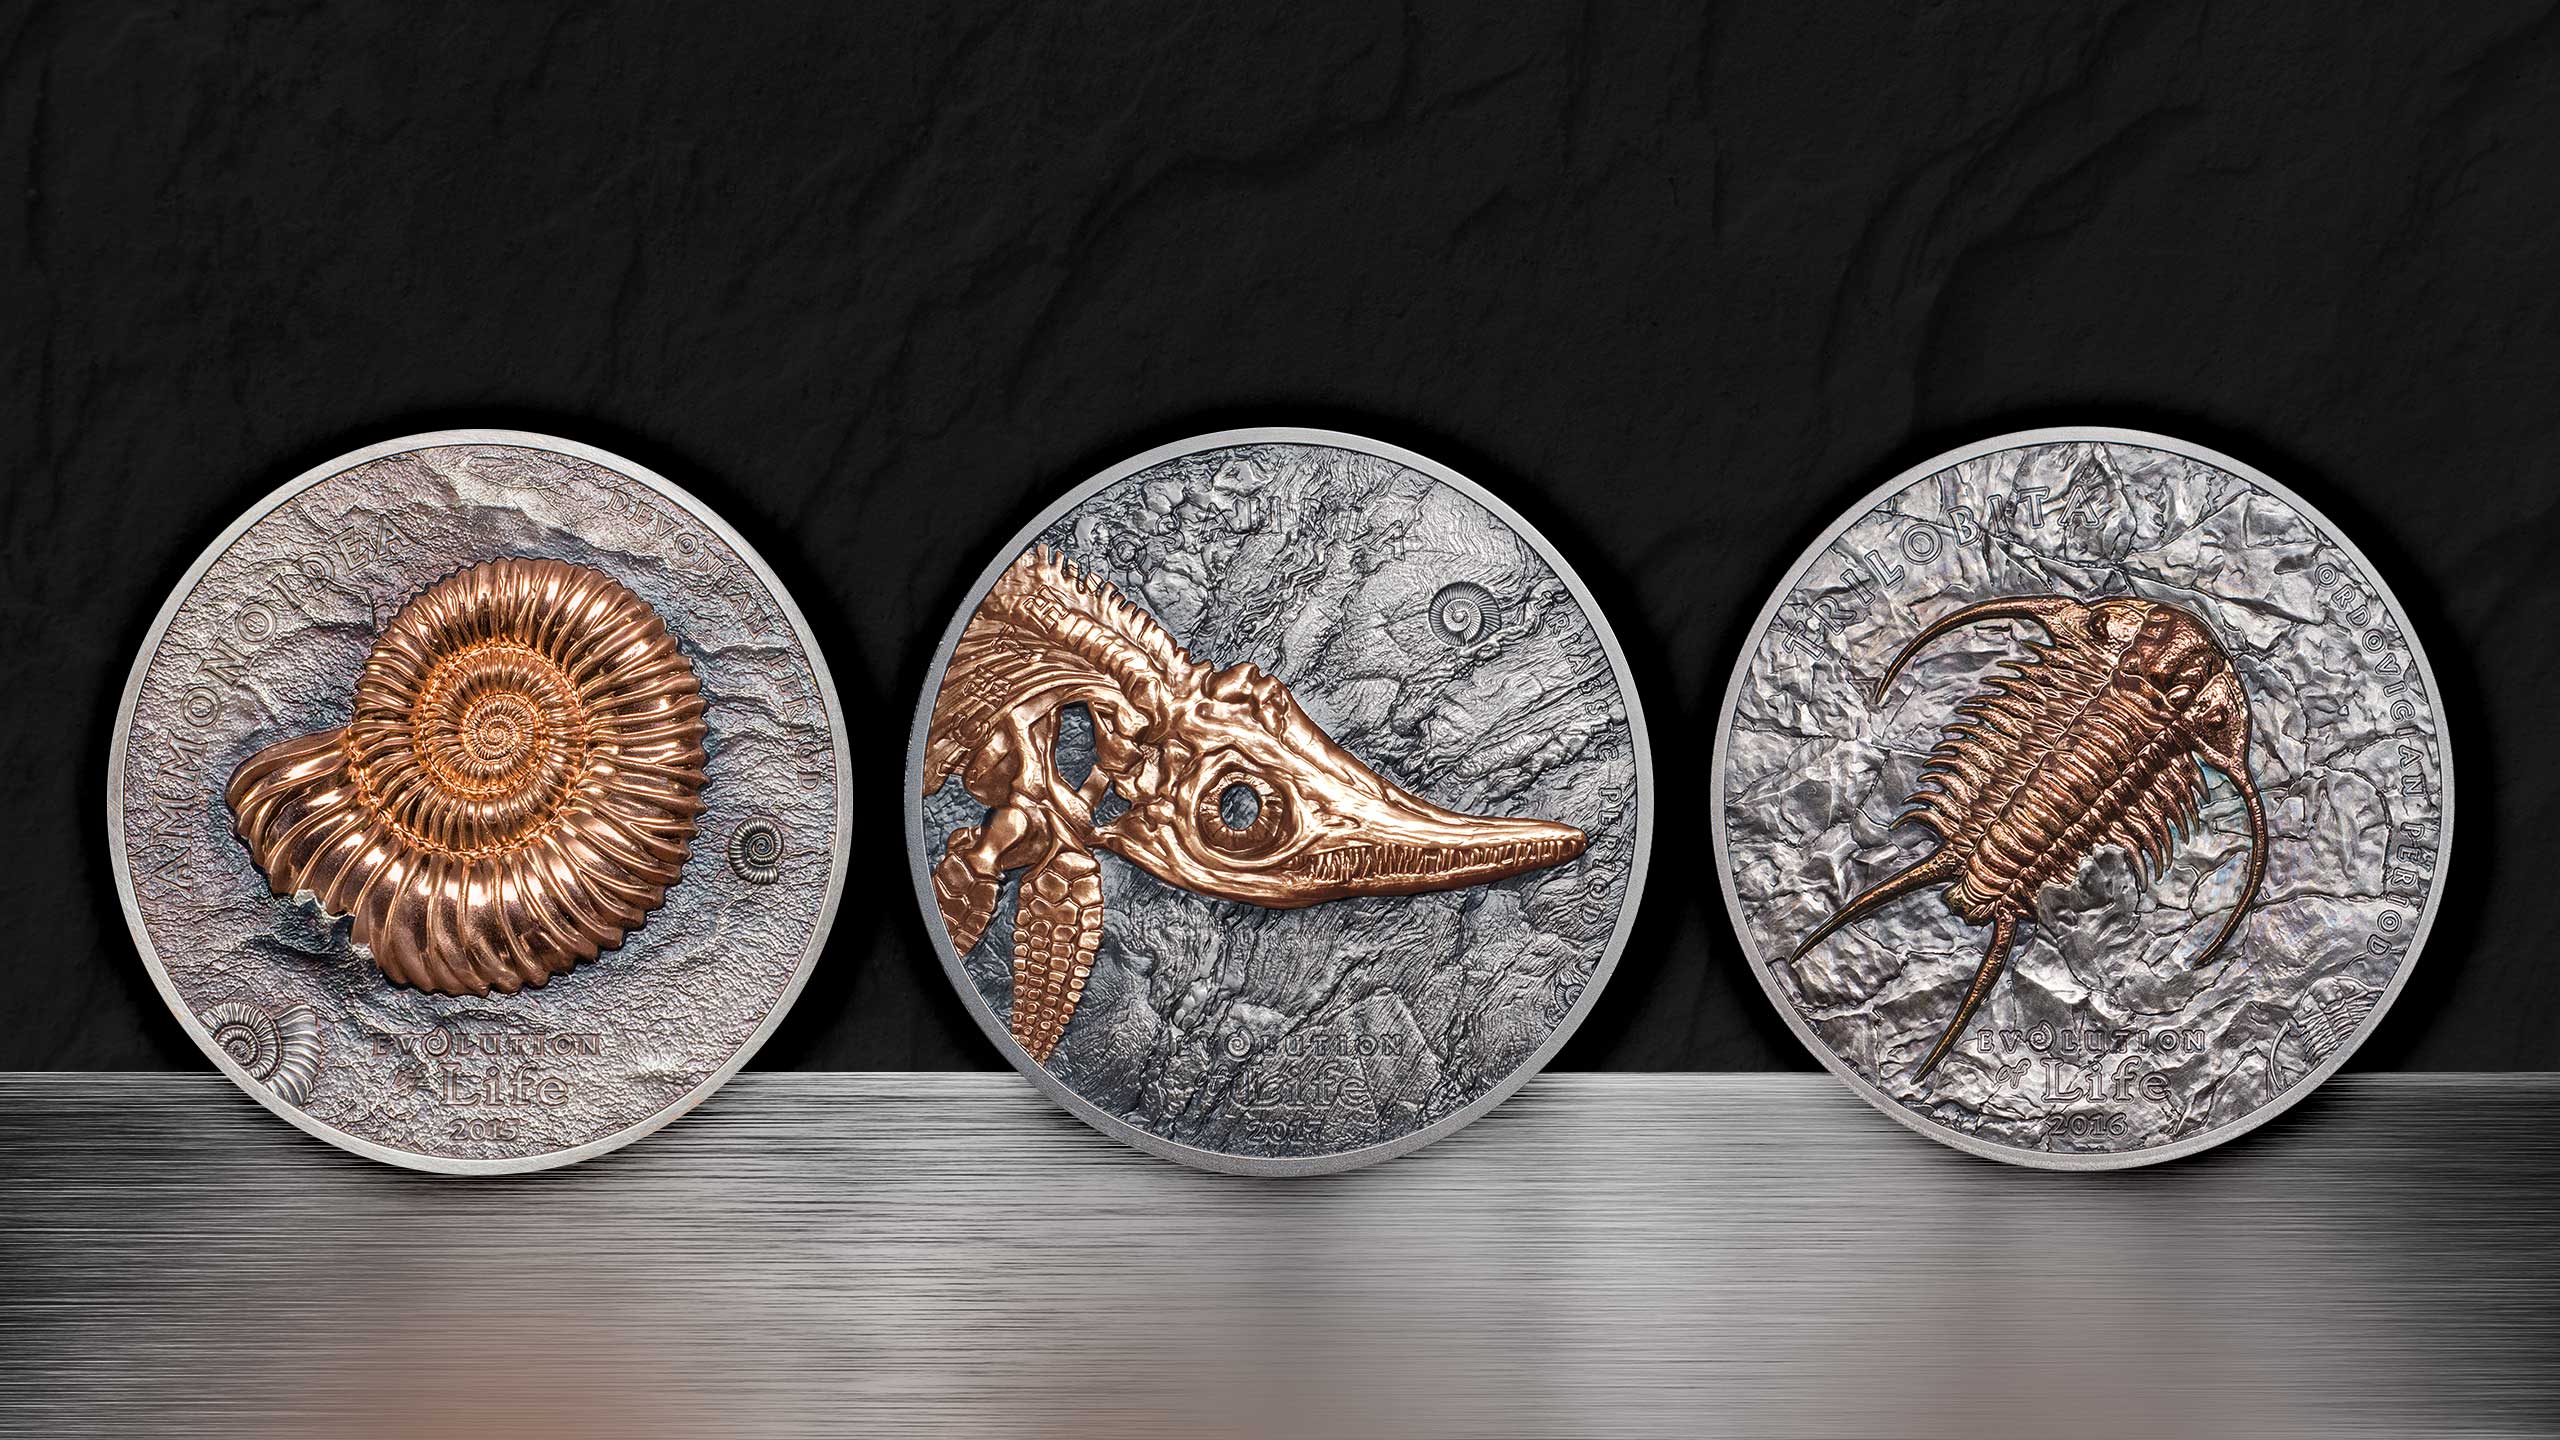 Red-gold and antique finish evolution of life silver coin with Ichthyosaur by CIT